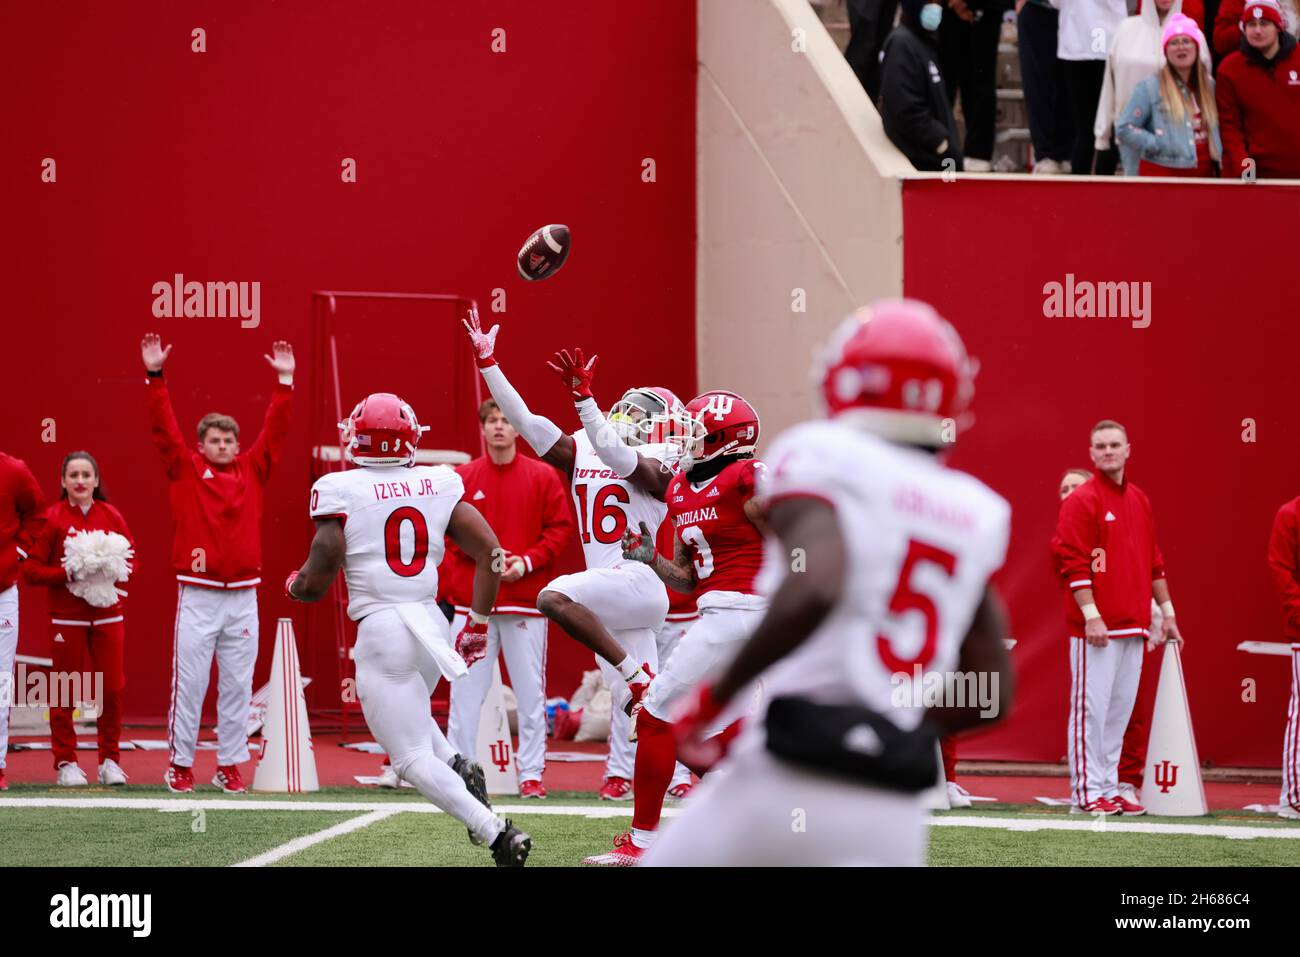 BLOOMINGTON, UNITED STATES - 2021/11/13: Max Melton (16) of the Rutgers Scarlet Knights intercepts a throw from Indiana University quarterback Jack Tuttle meant for Ty Fryfogle (3) of the Indiana Hoosiers during an NCAA football game on November 13, 2021 at Memorial Stadium in Bloomington, Ind. Rutgers beat IU 38-3. Stock Photo